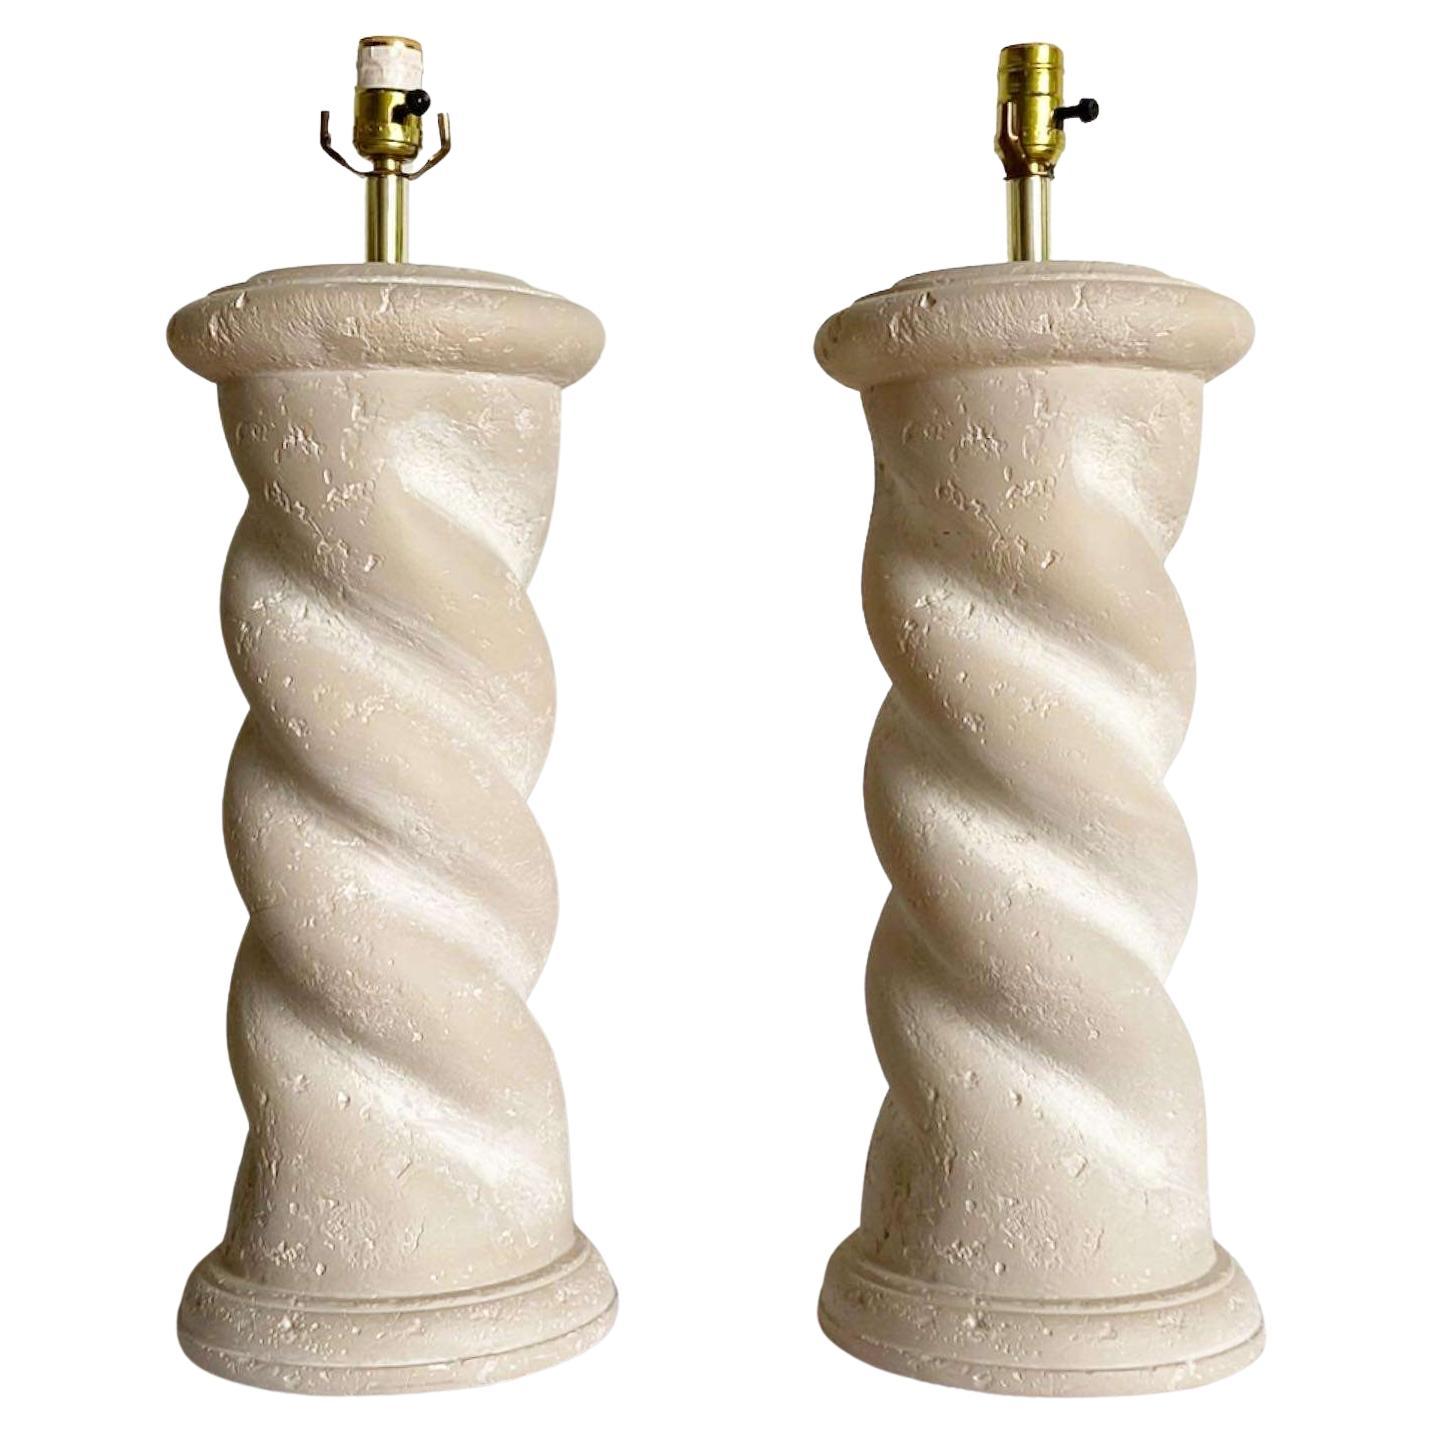 Postmodern Swirl Plaster Table Lamps by Bloomingdale’s - a Pair For Sale